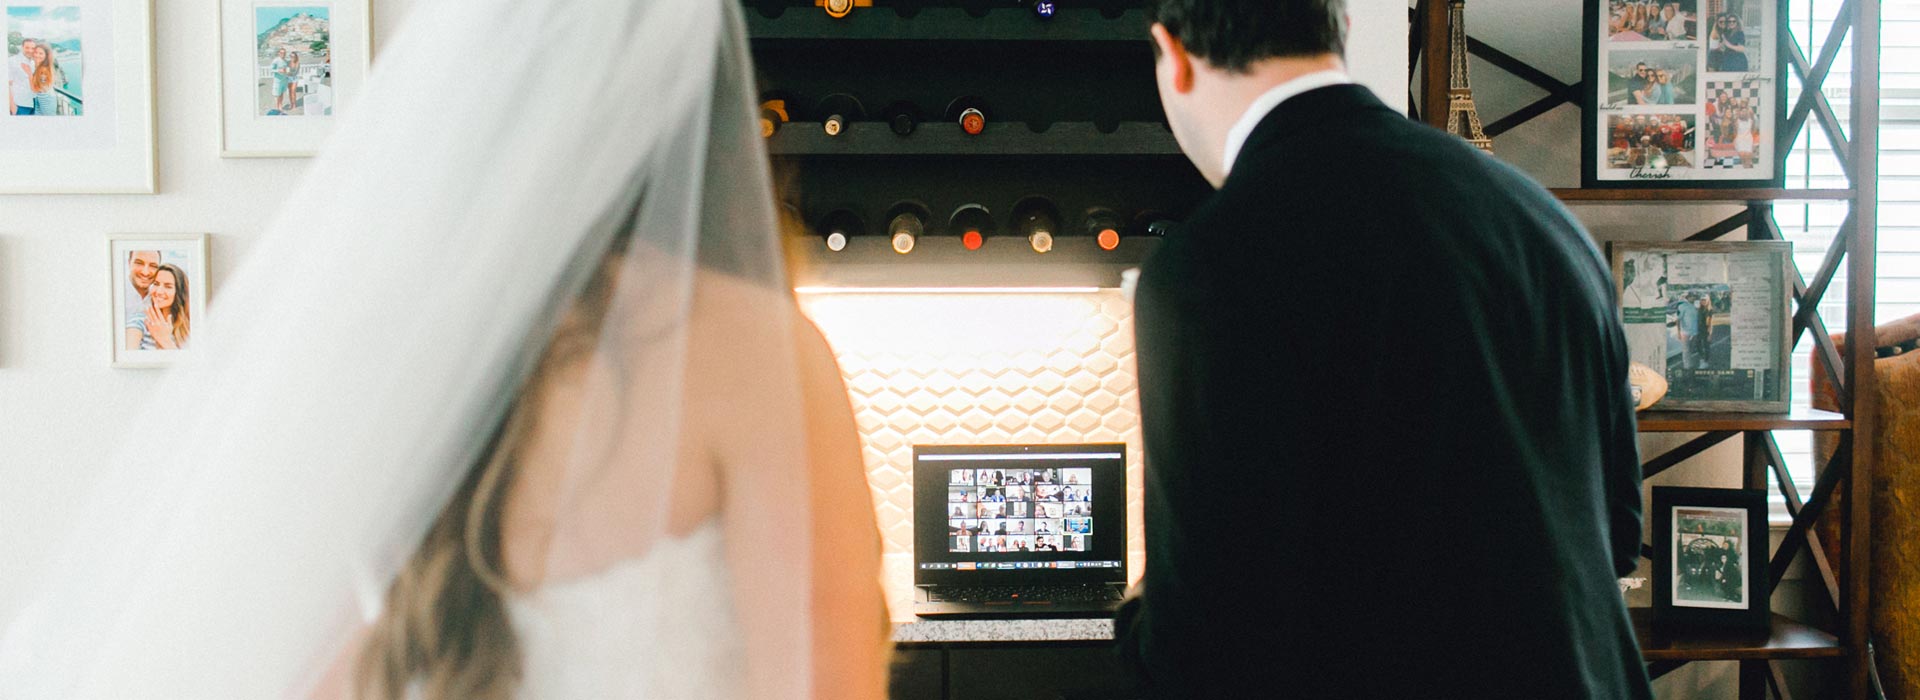 Love is Not Canceled: How the Wedding Industry is Spreading Joy During COVID-19